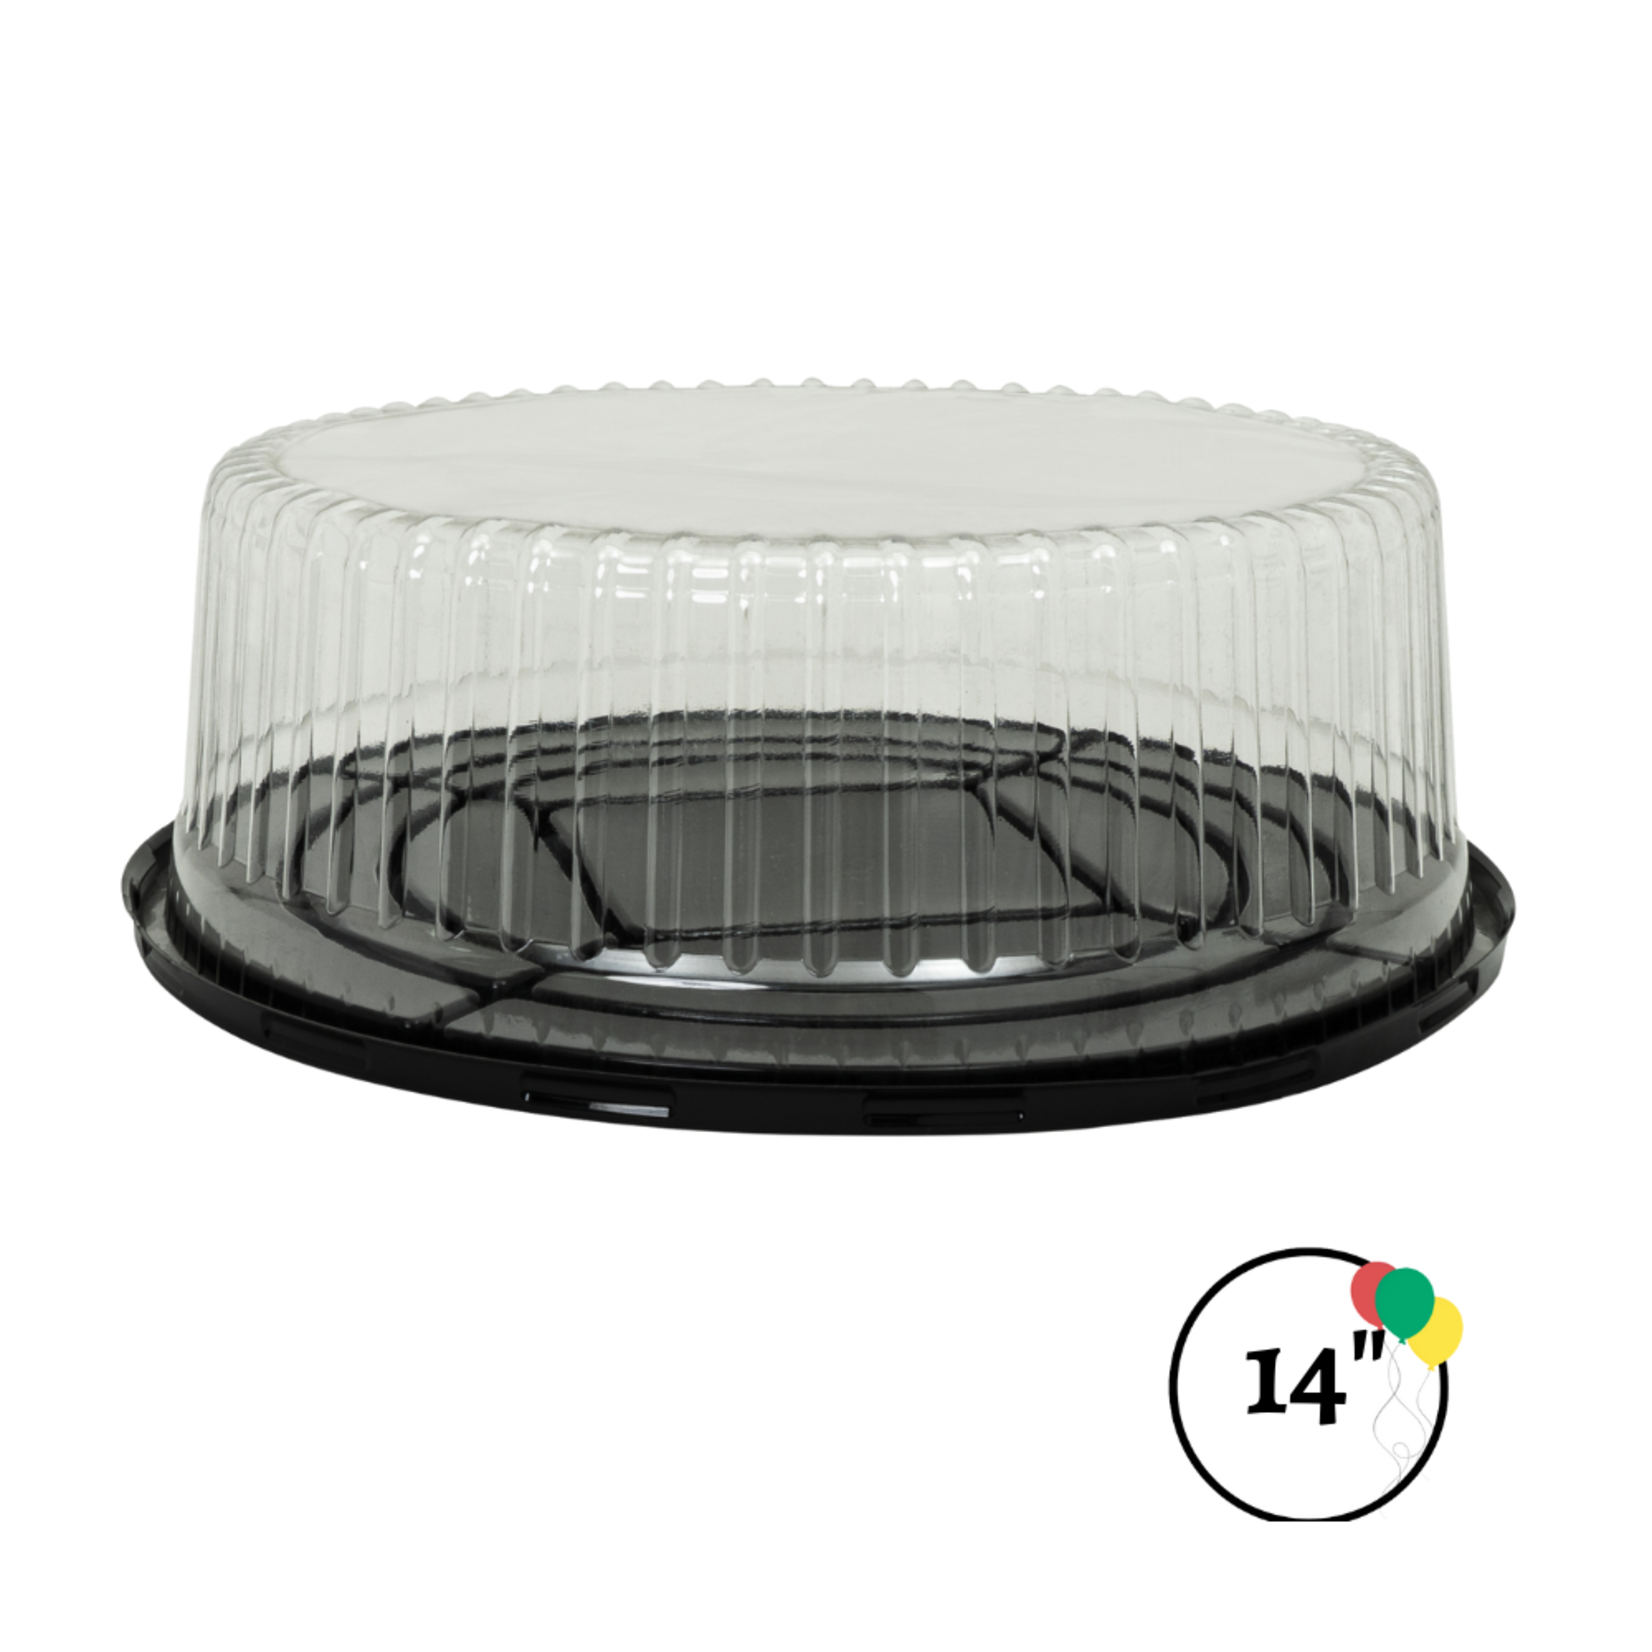 Round Cake Display Container With Clear Dome Lid - 14"